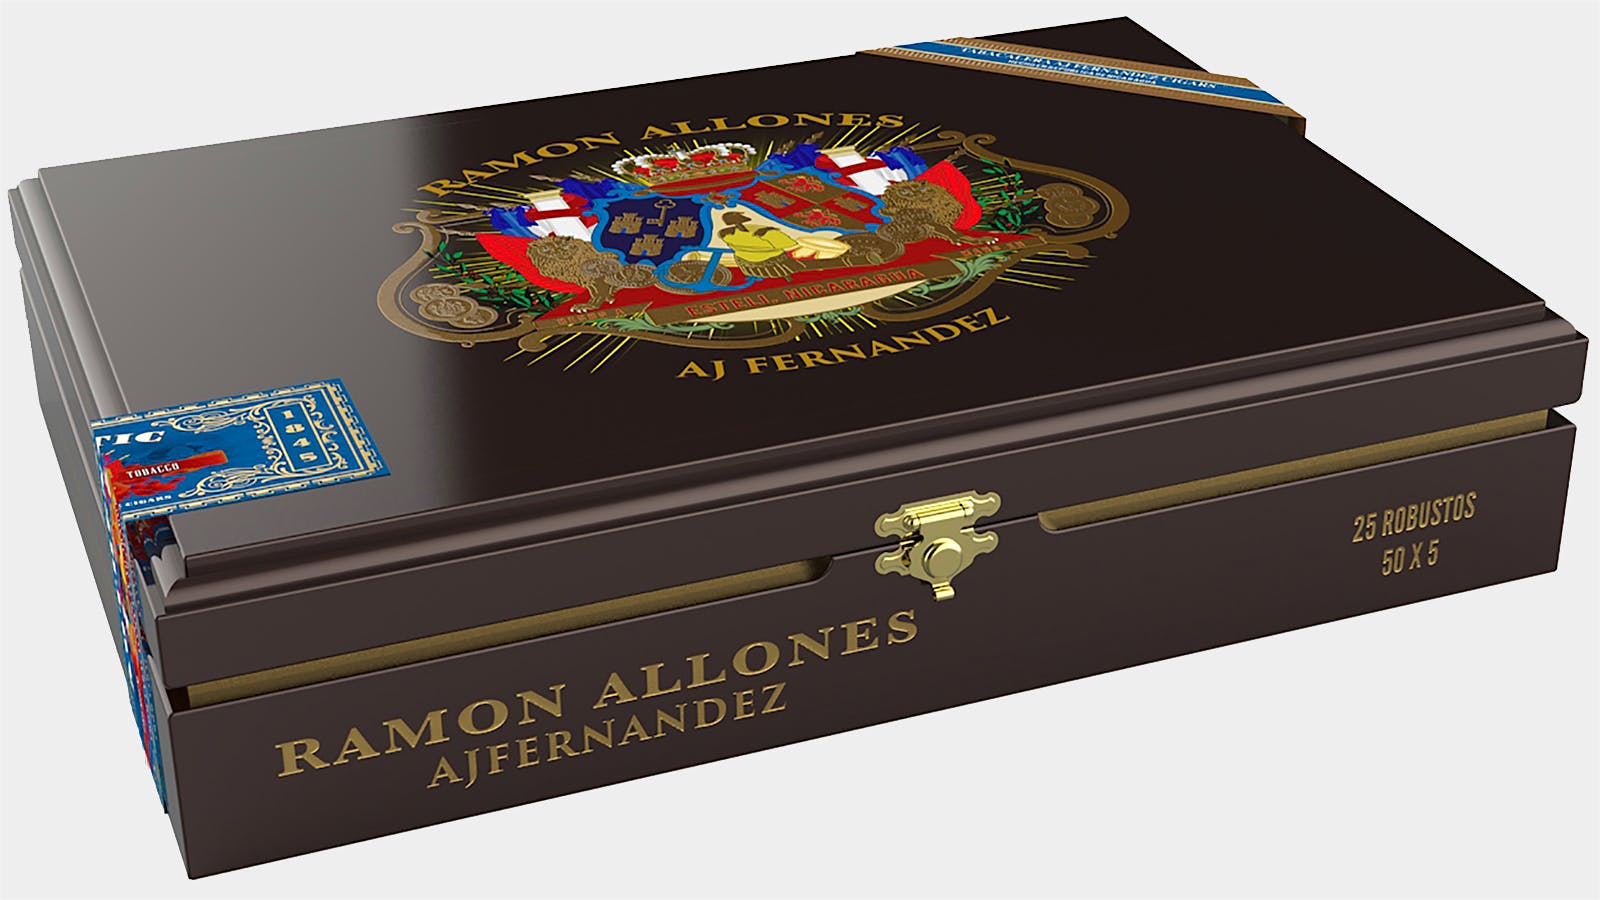 The Ramon Allones cigars are made at the Tabacalera A.J. Fernandez Cigars de Nicaragua factory.